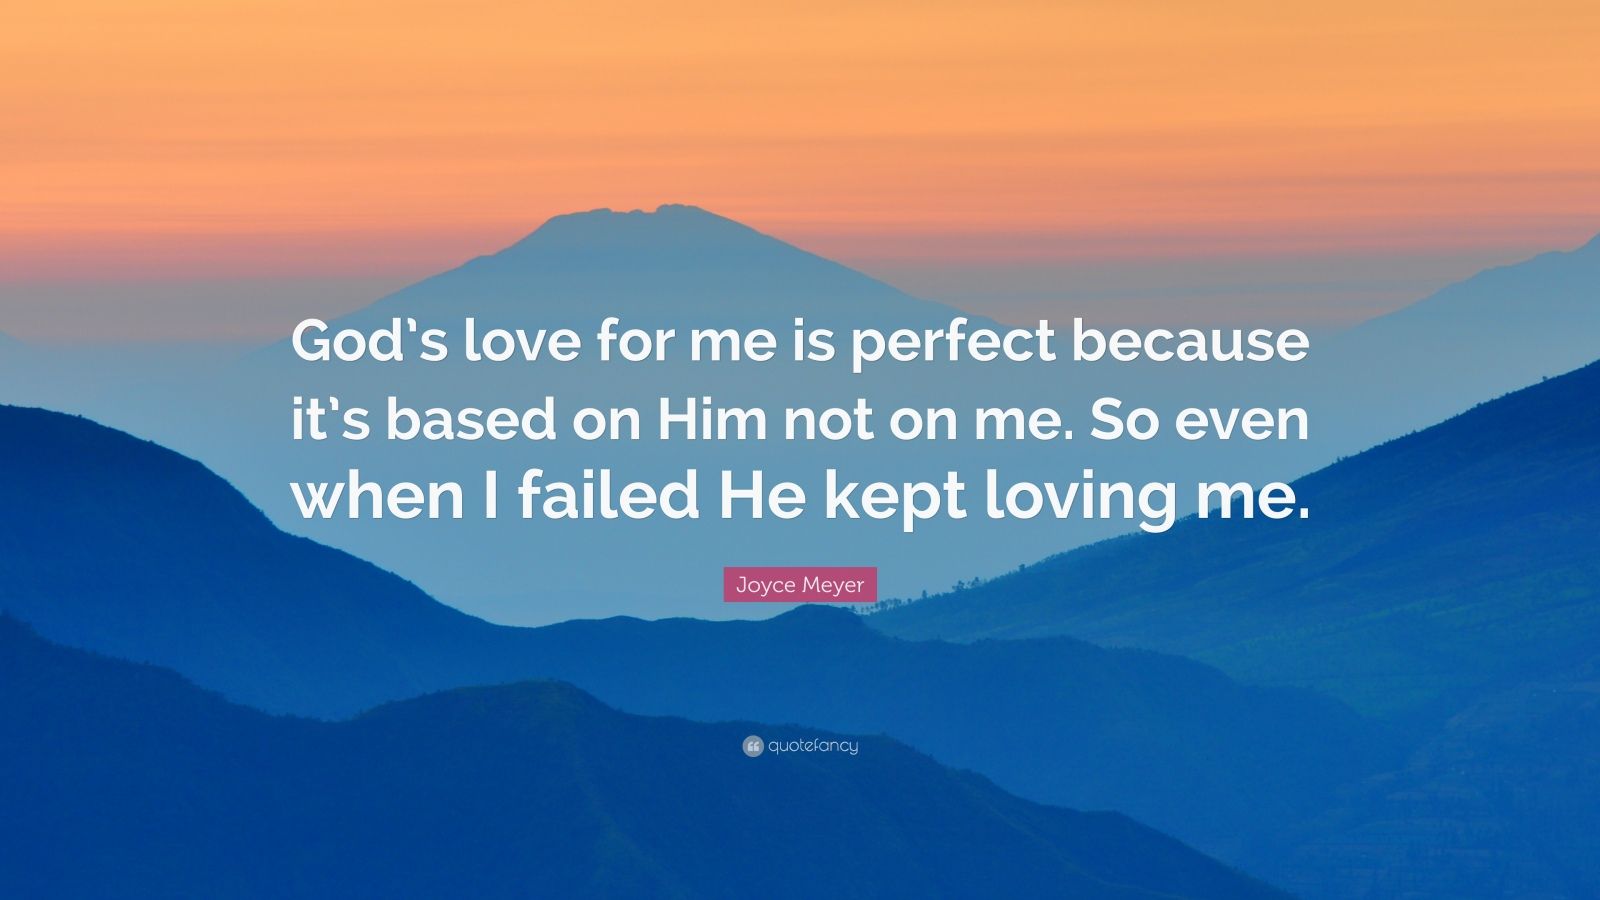 Joyce meyer quote gods love for me is perfect because its based on him